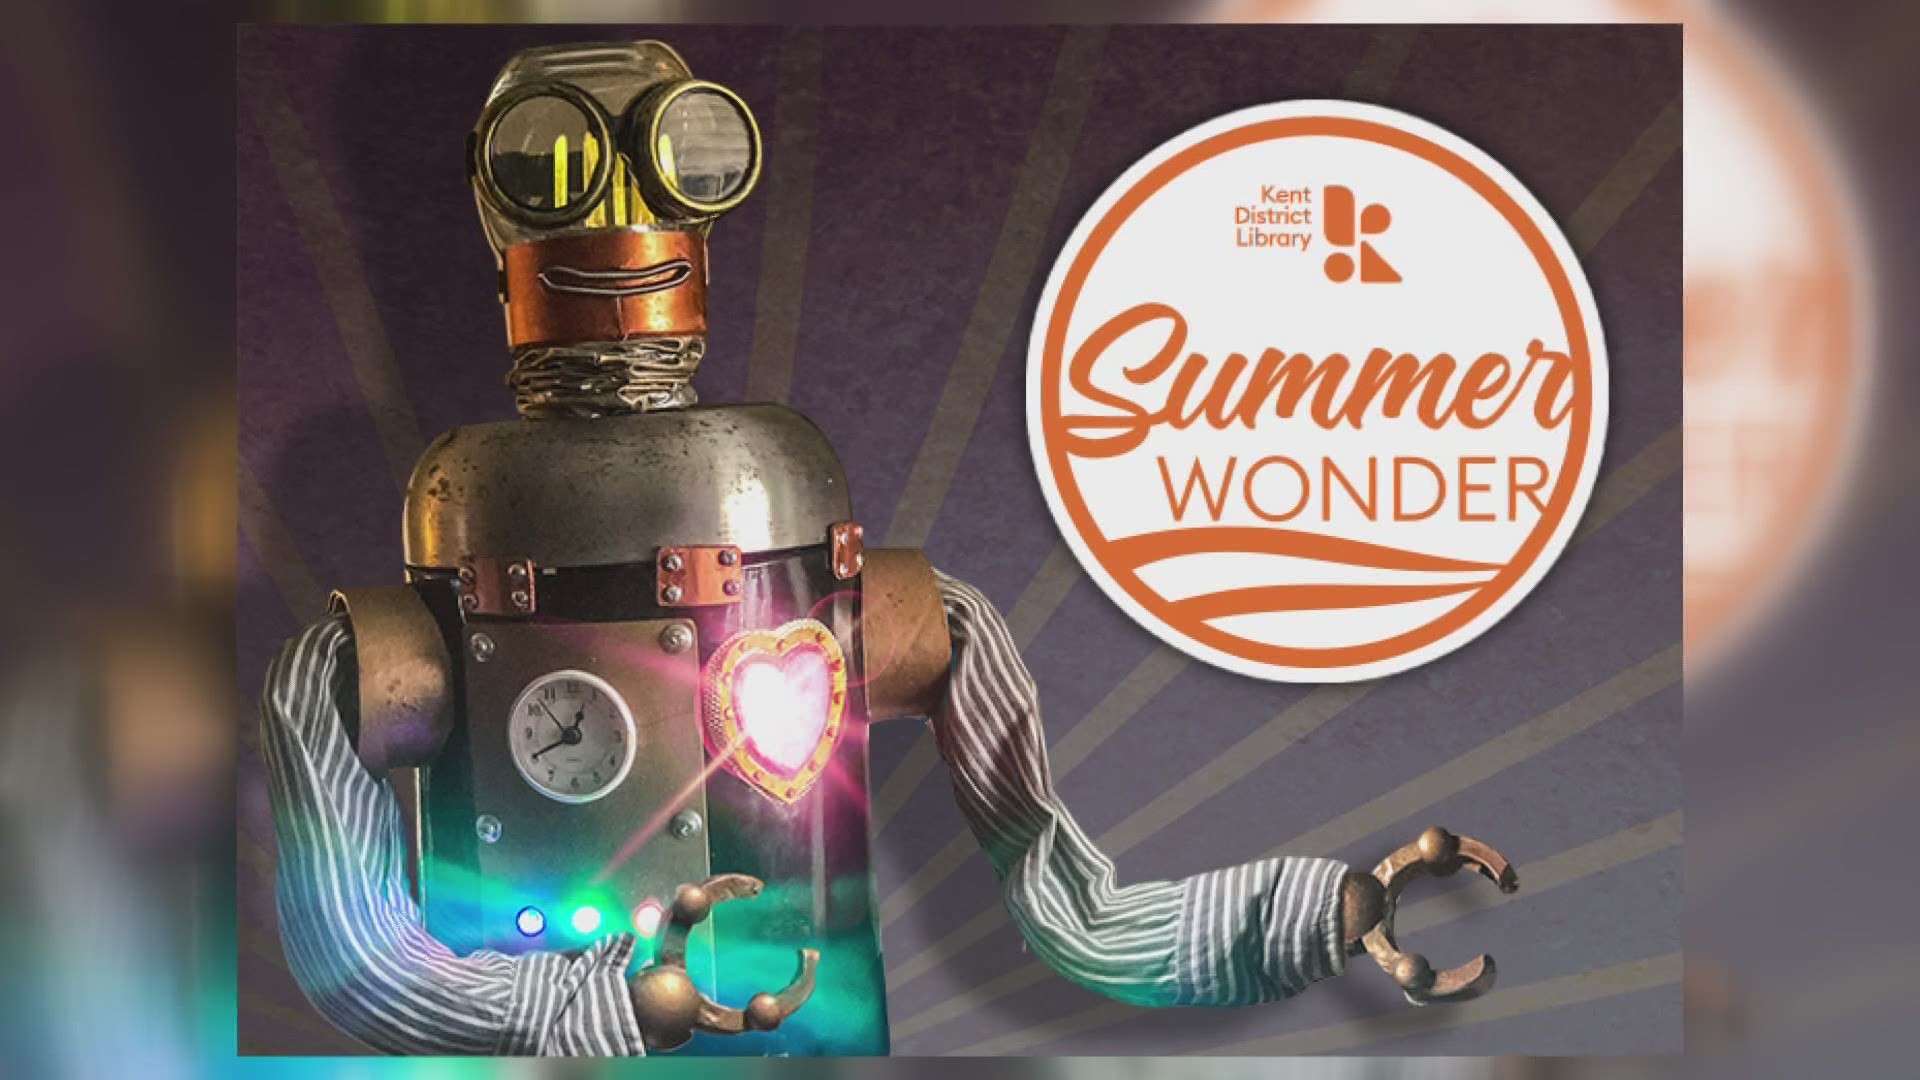 Learn about "Summer Wonder" from KDL.